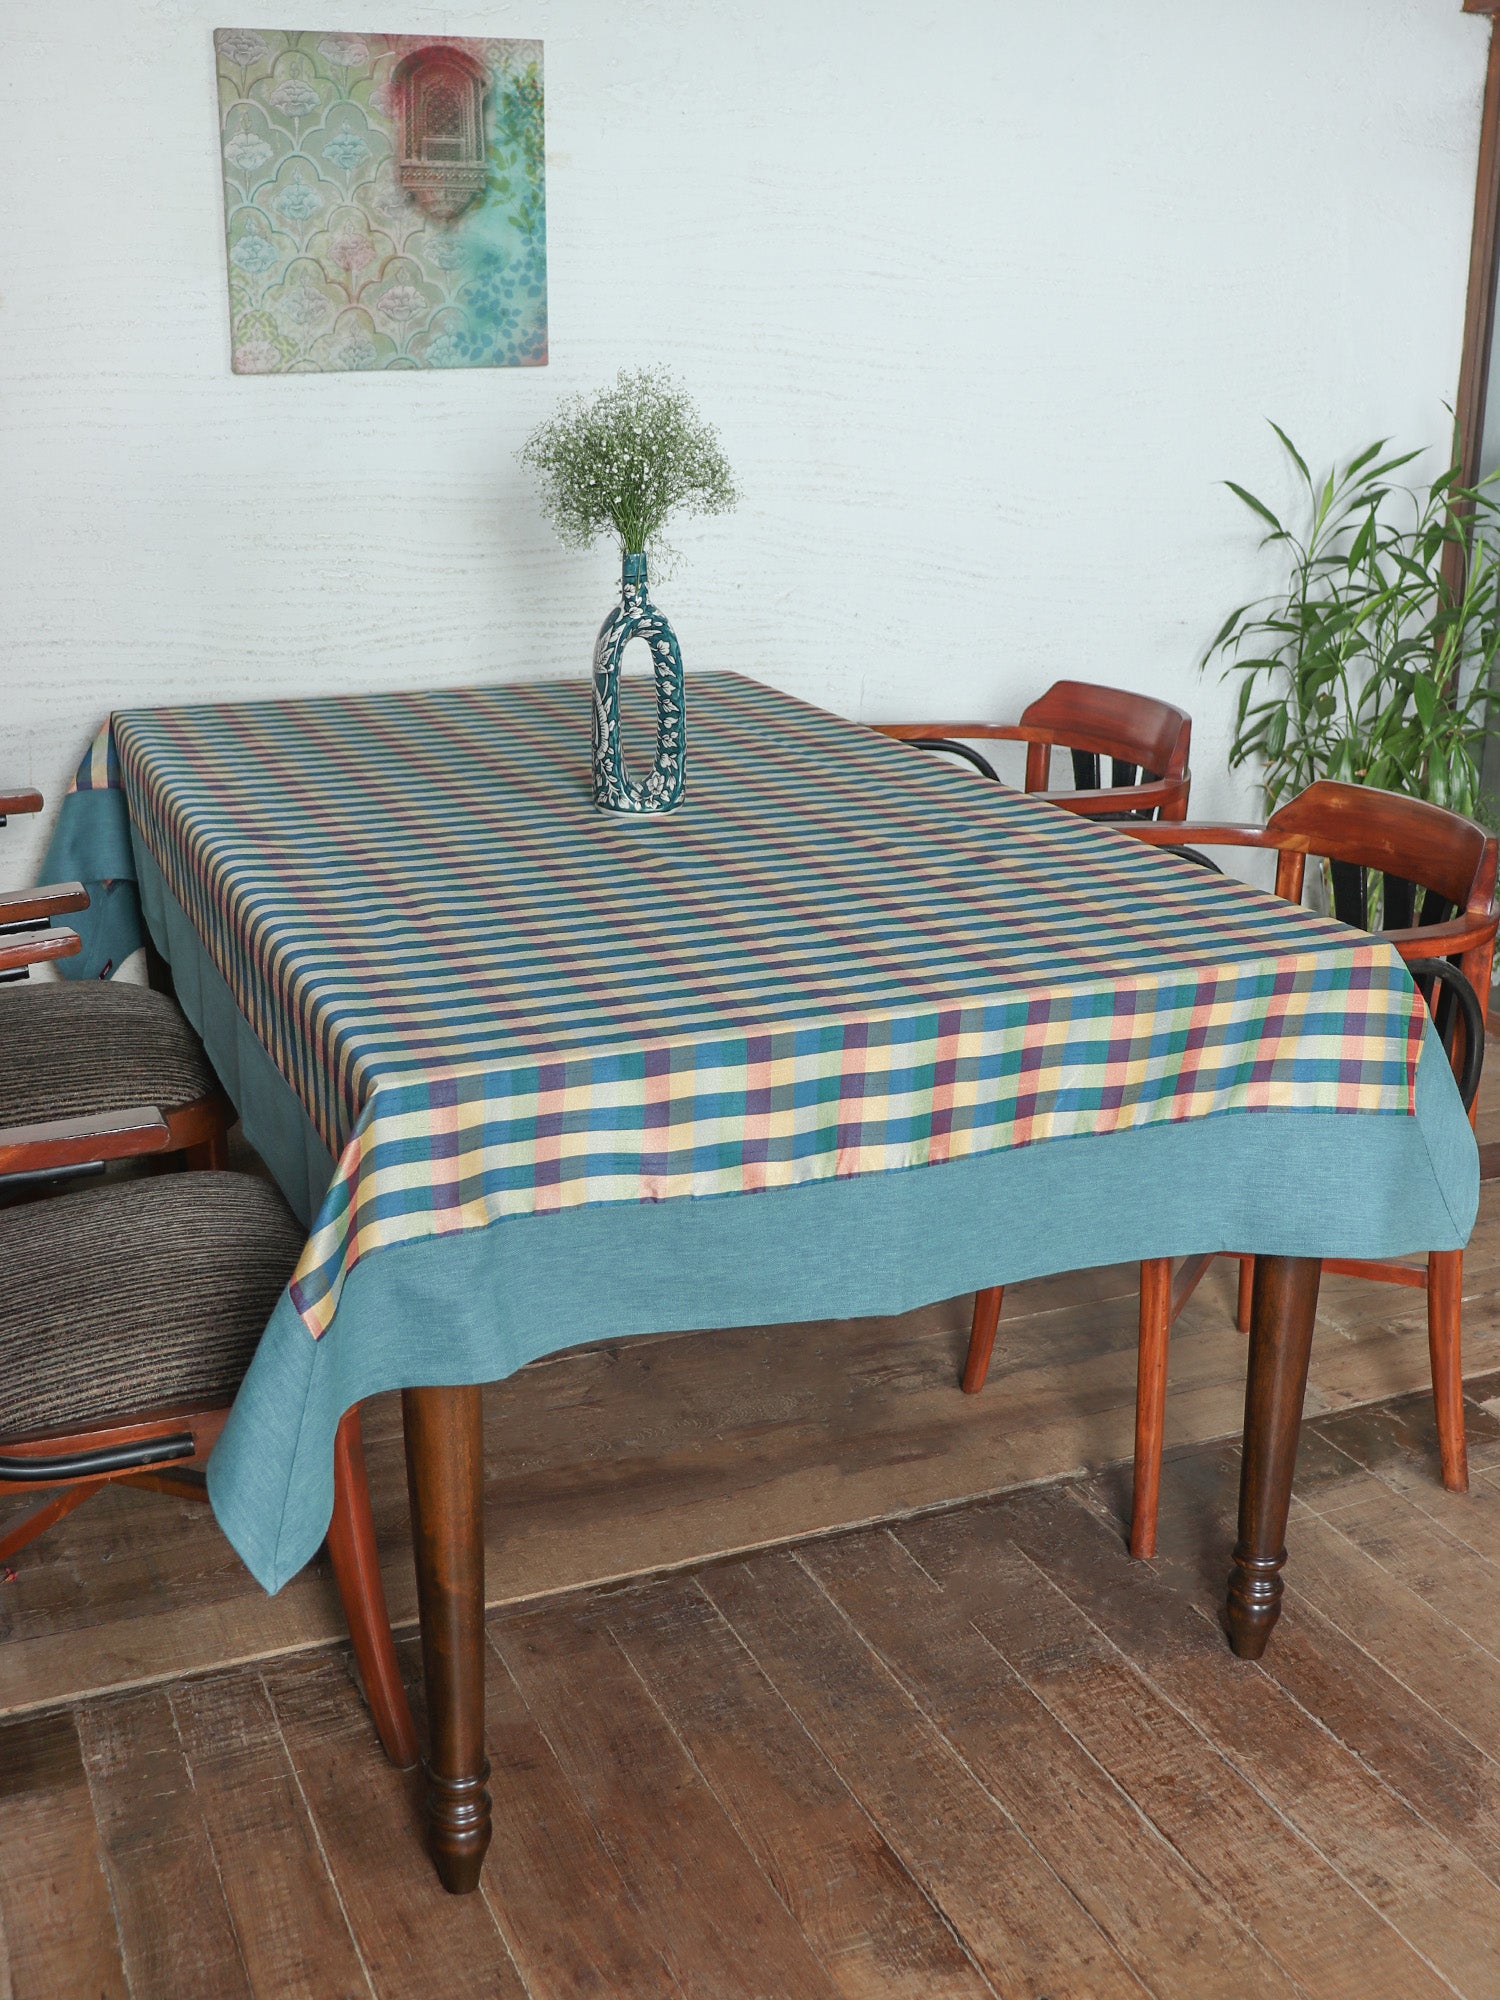 Table Cover with Patchwork Border | Checkered Brocade Silk - Blue | Heat Resistant Table Cover for Kitchen Table/Dining Table Cloth, 52 X 84 Inches; 130 cm X 210 cm 